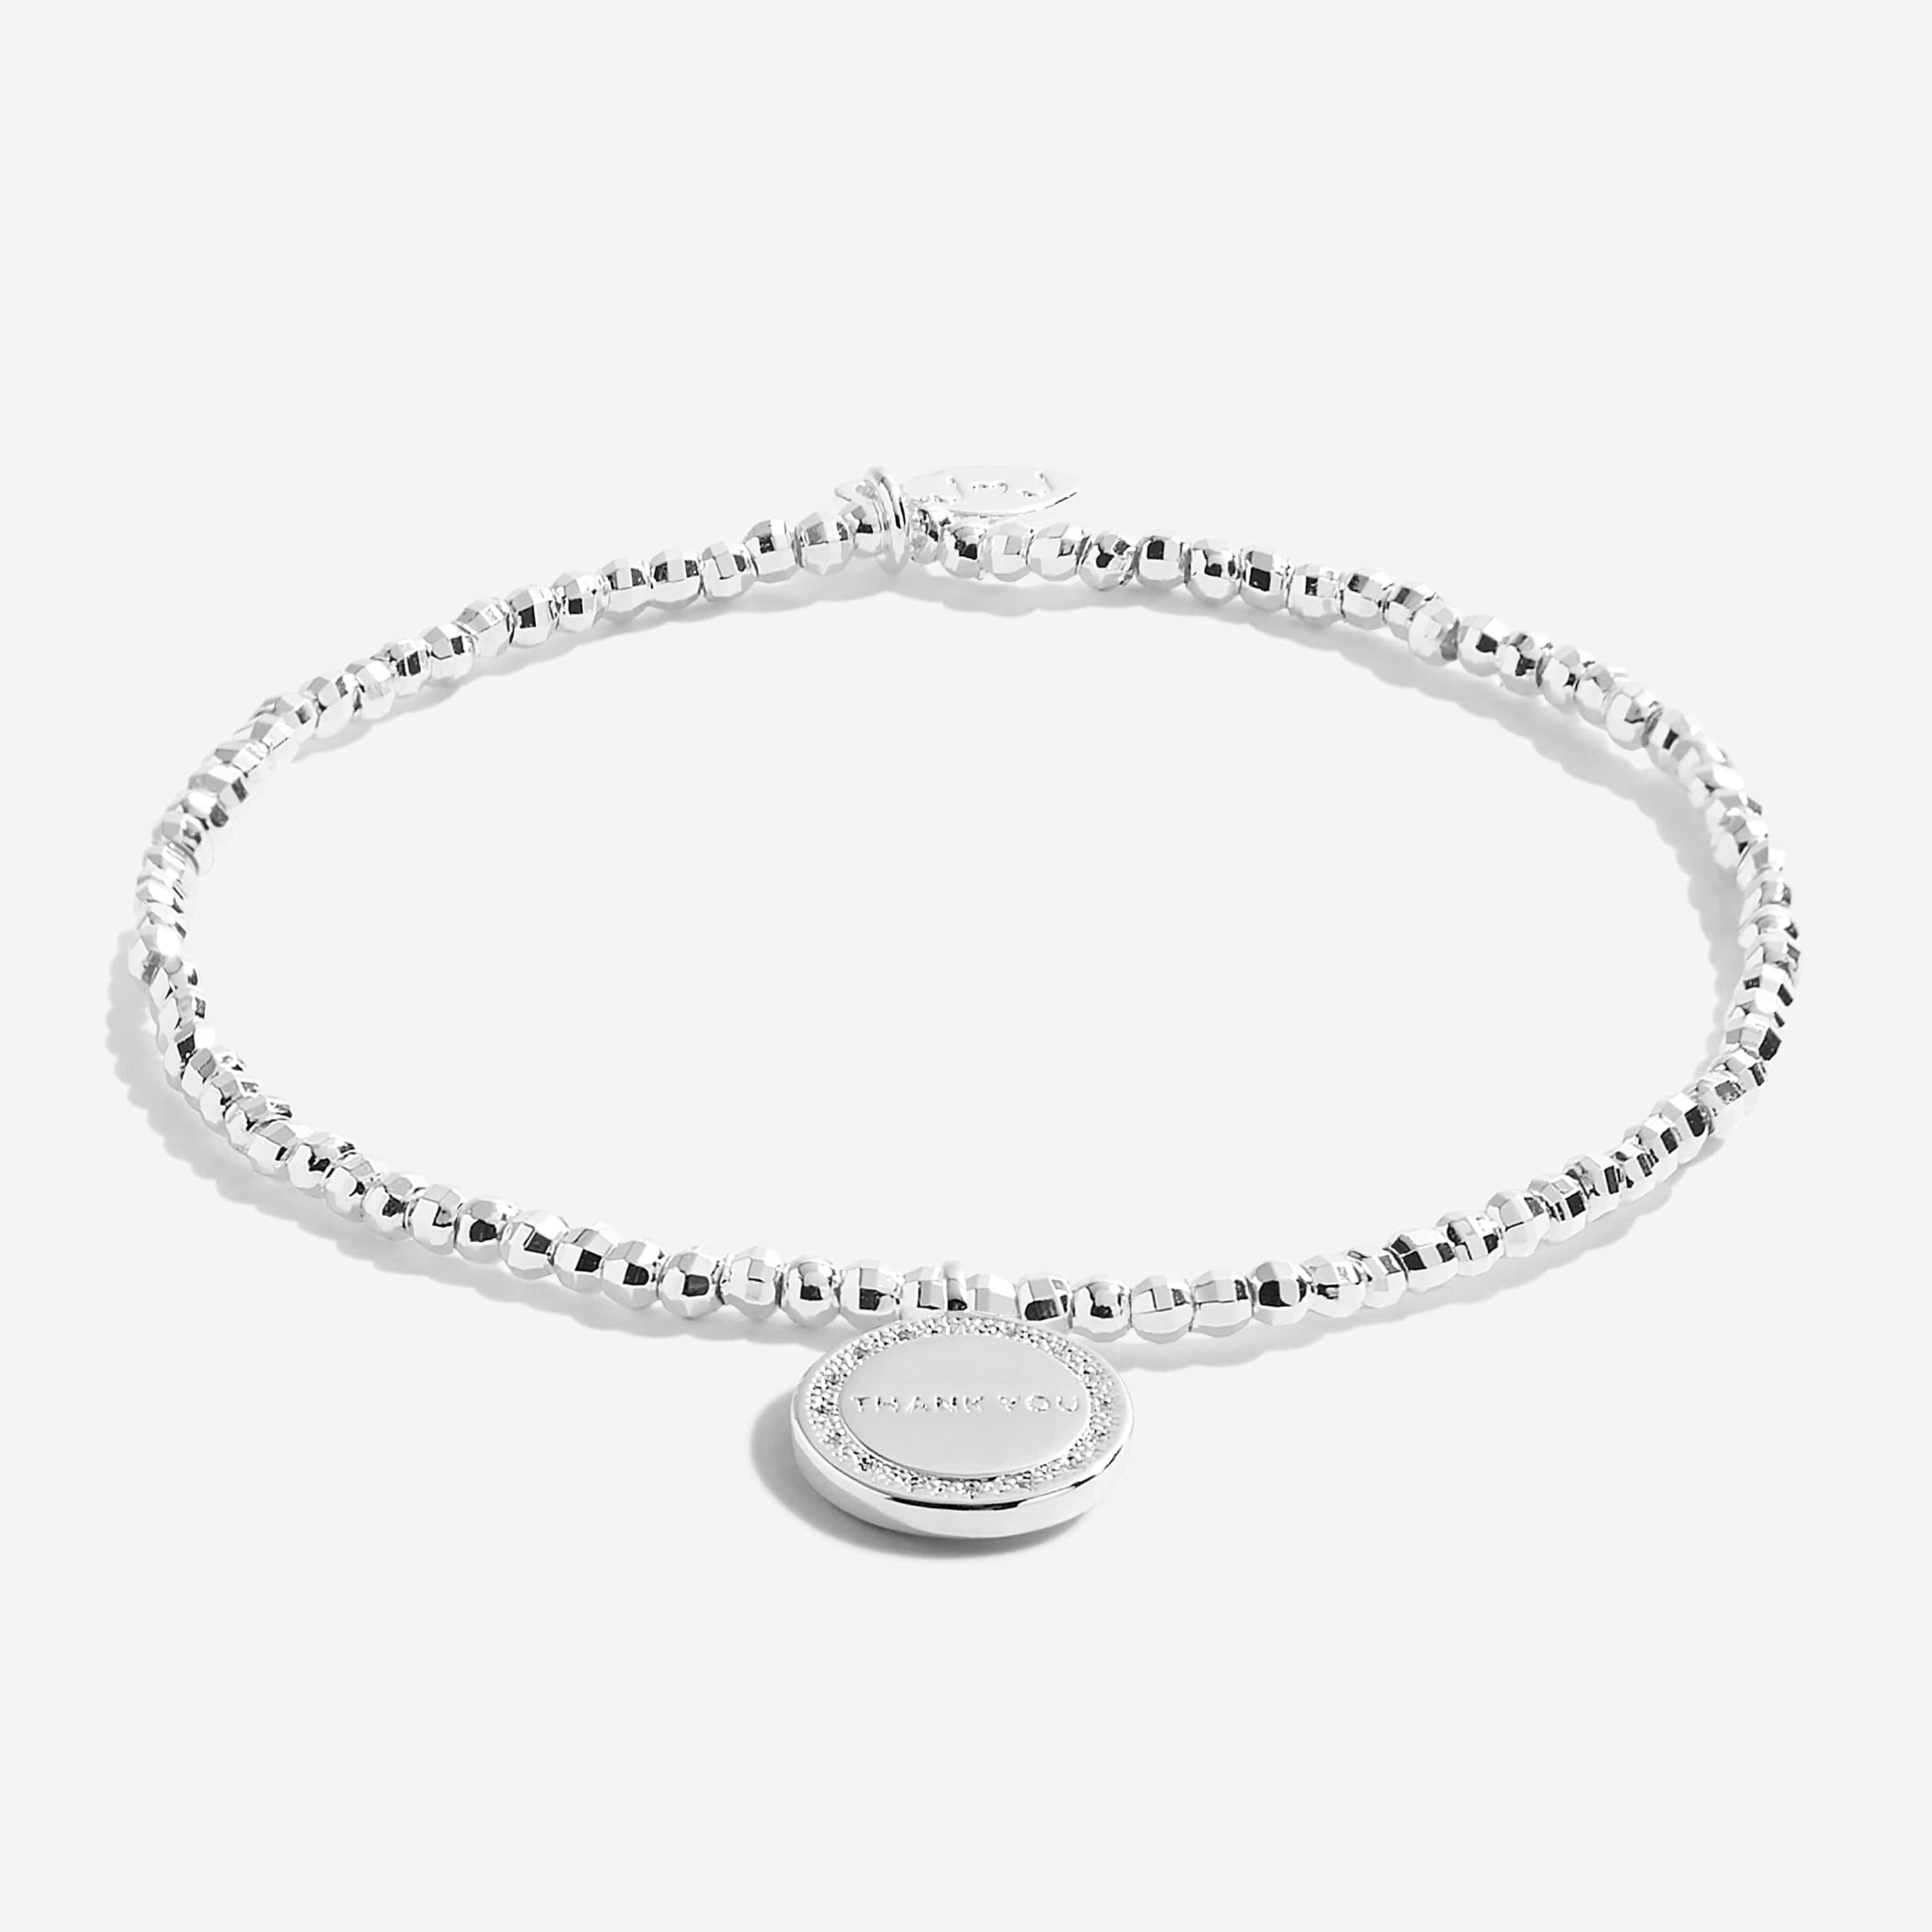 Joma Jewellery Bracelet Joma Jewellery Beautifully Boxed Bracelet - Thank You For Helping Me Tie The Knot